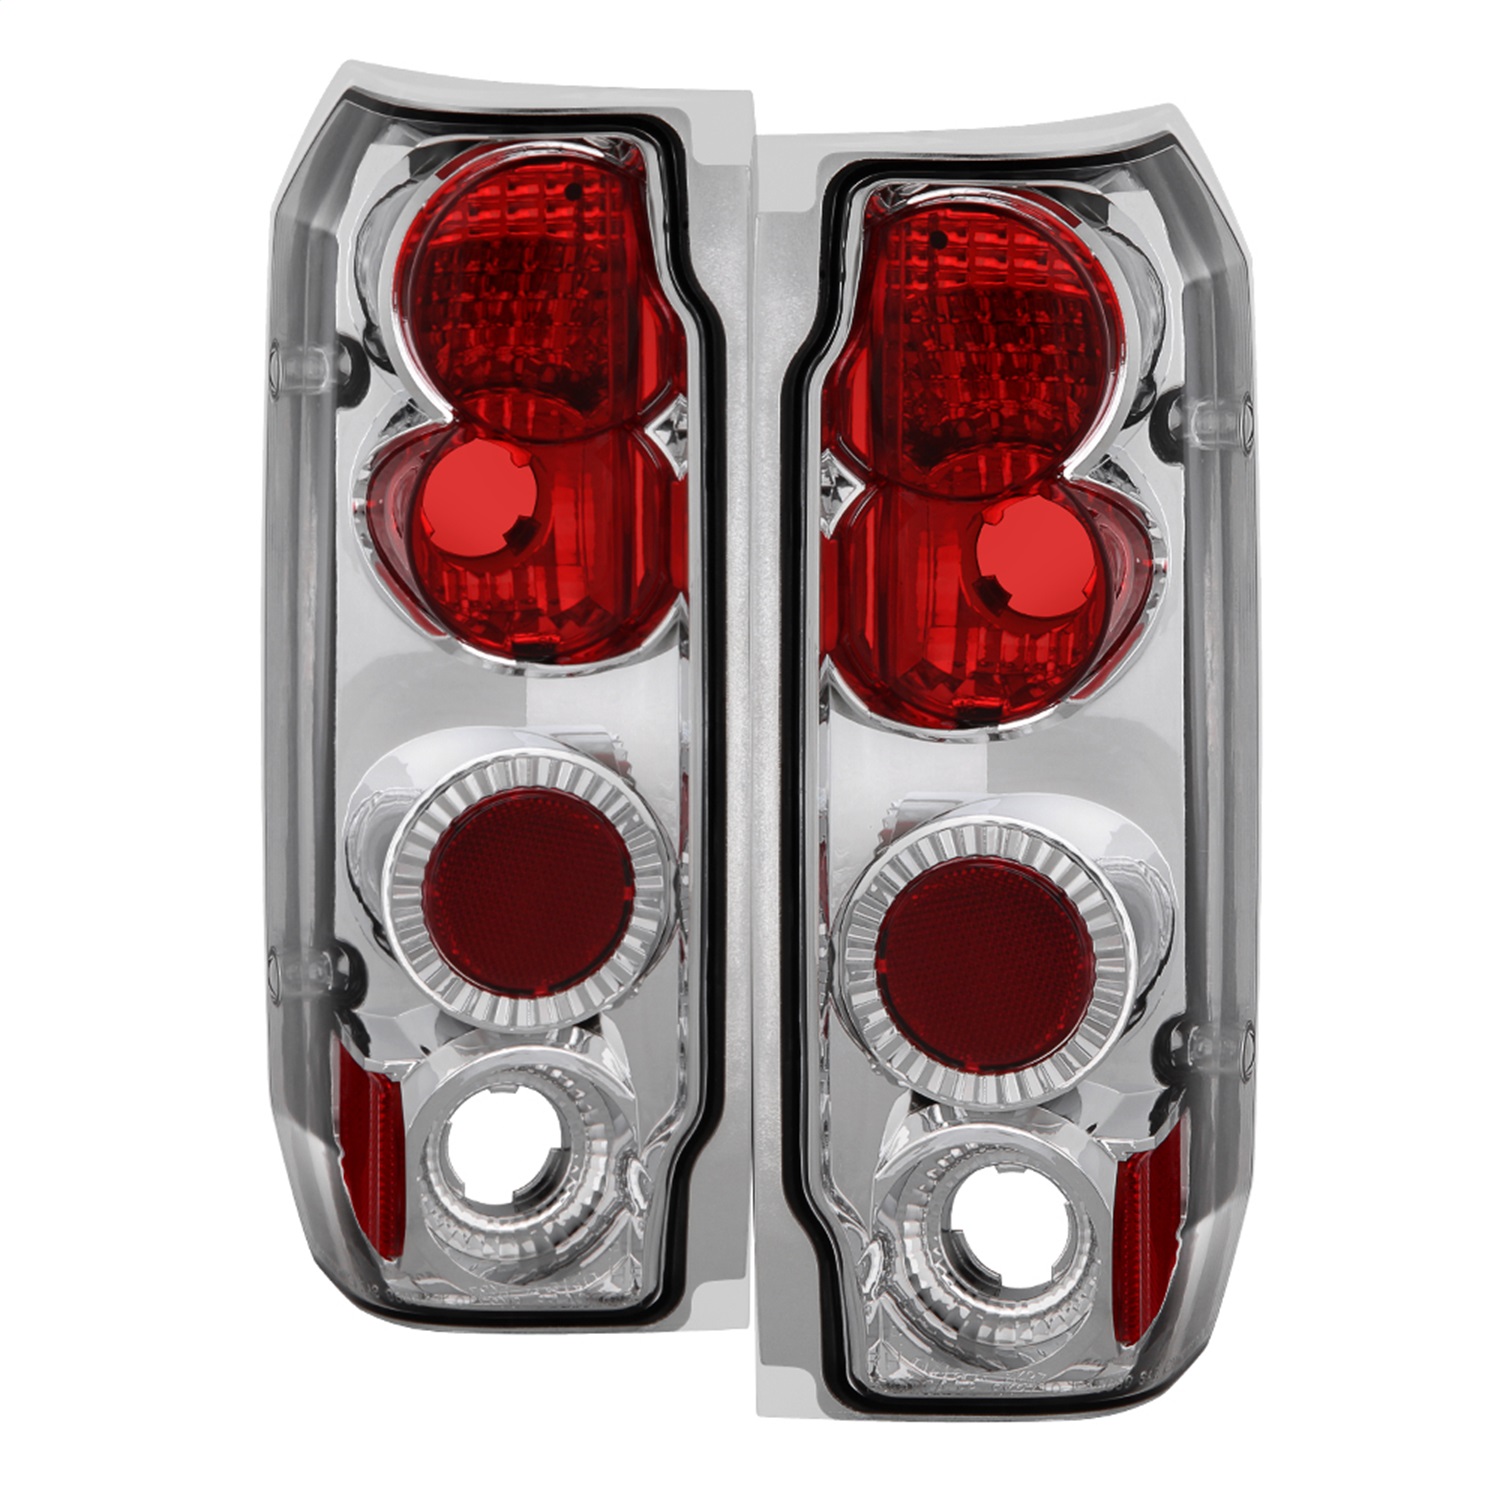 Spyder Auto 5003317 Euro Style Tail Lights Fits 87-96 Bronco F-150